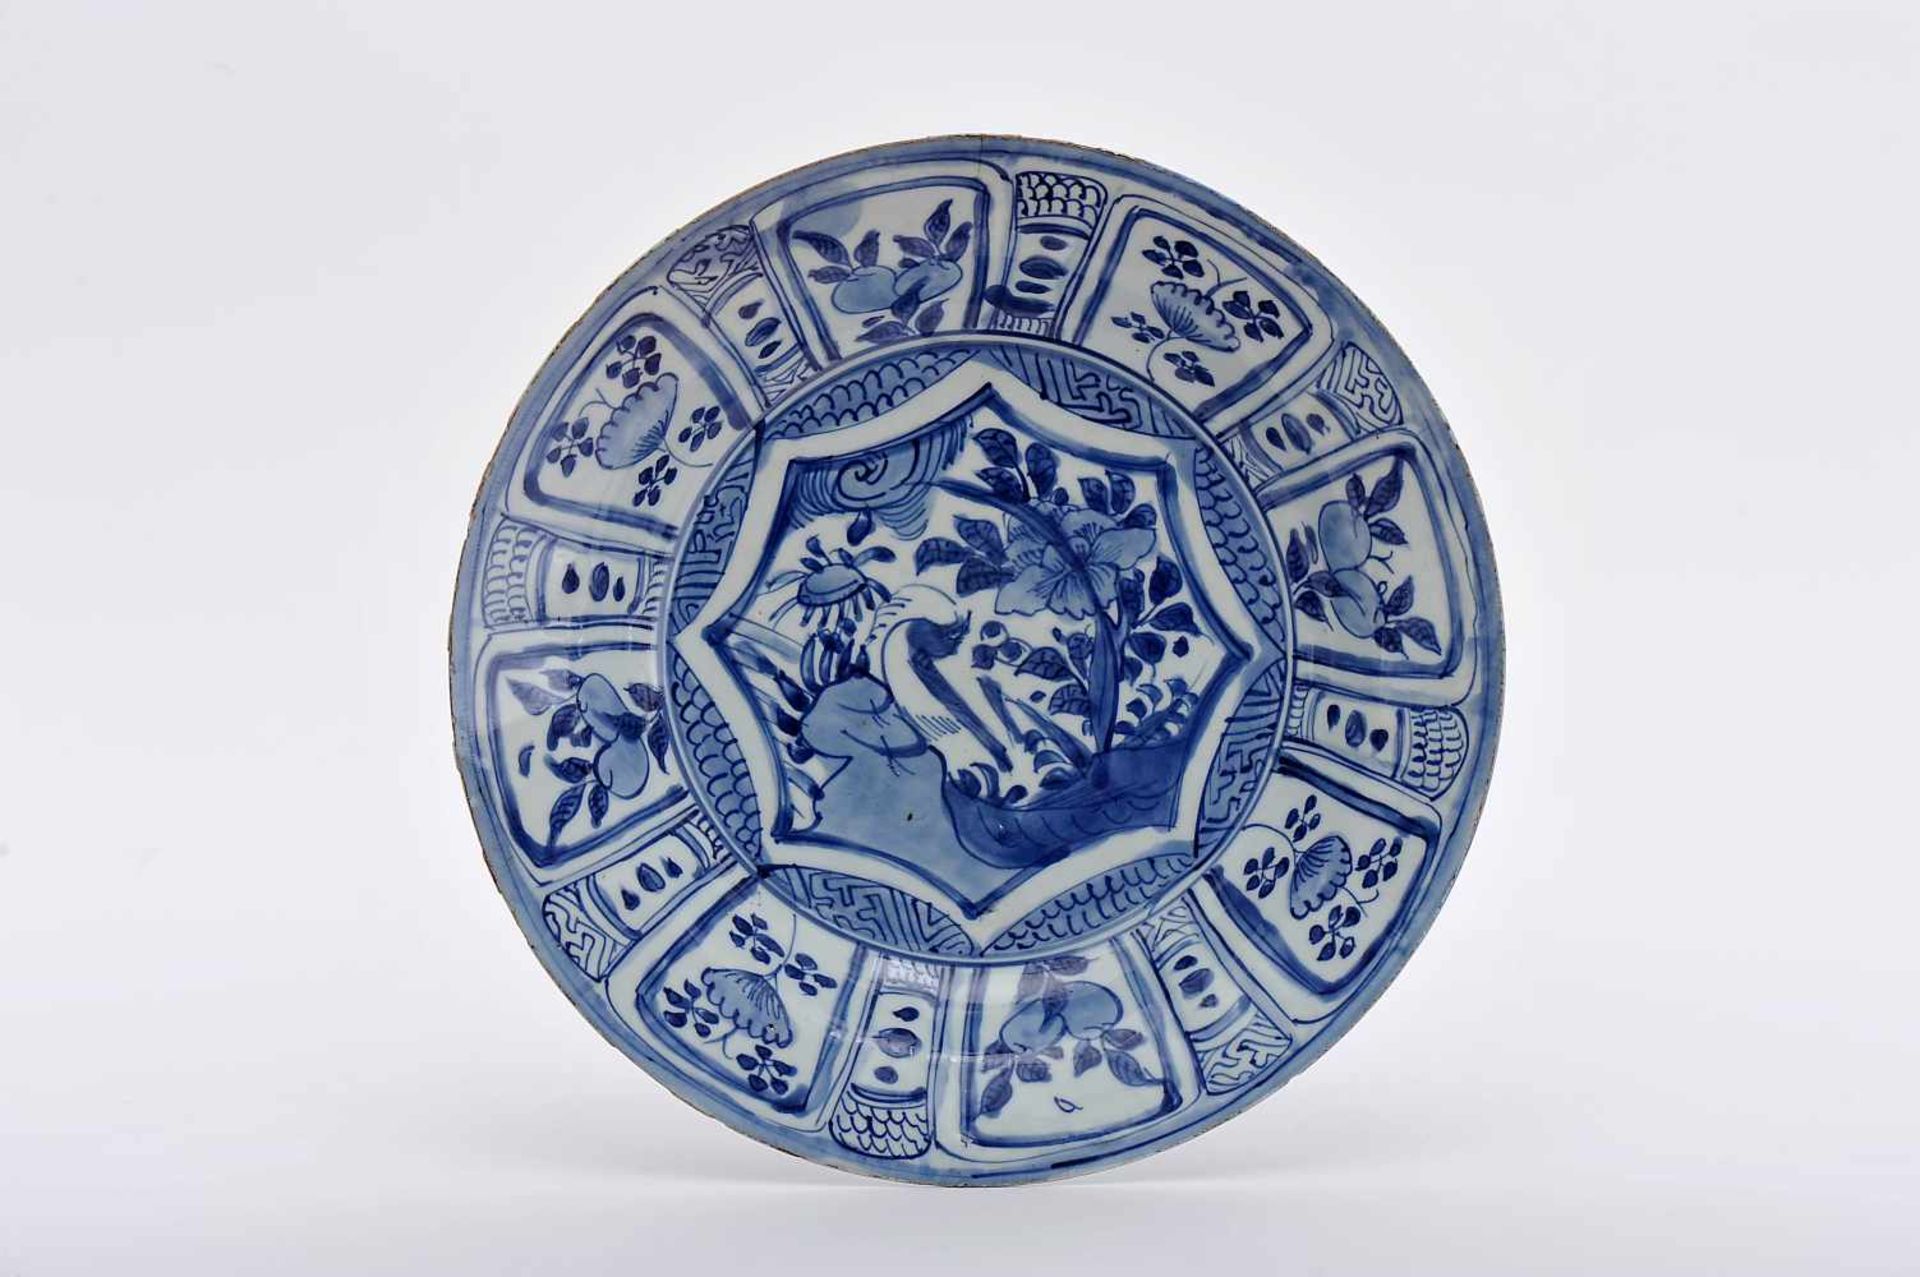 A Dish, Chinese export porcelain (Kraak), blue decoration "Landscape with crab", Wanli period (